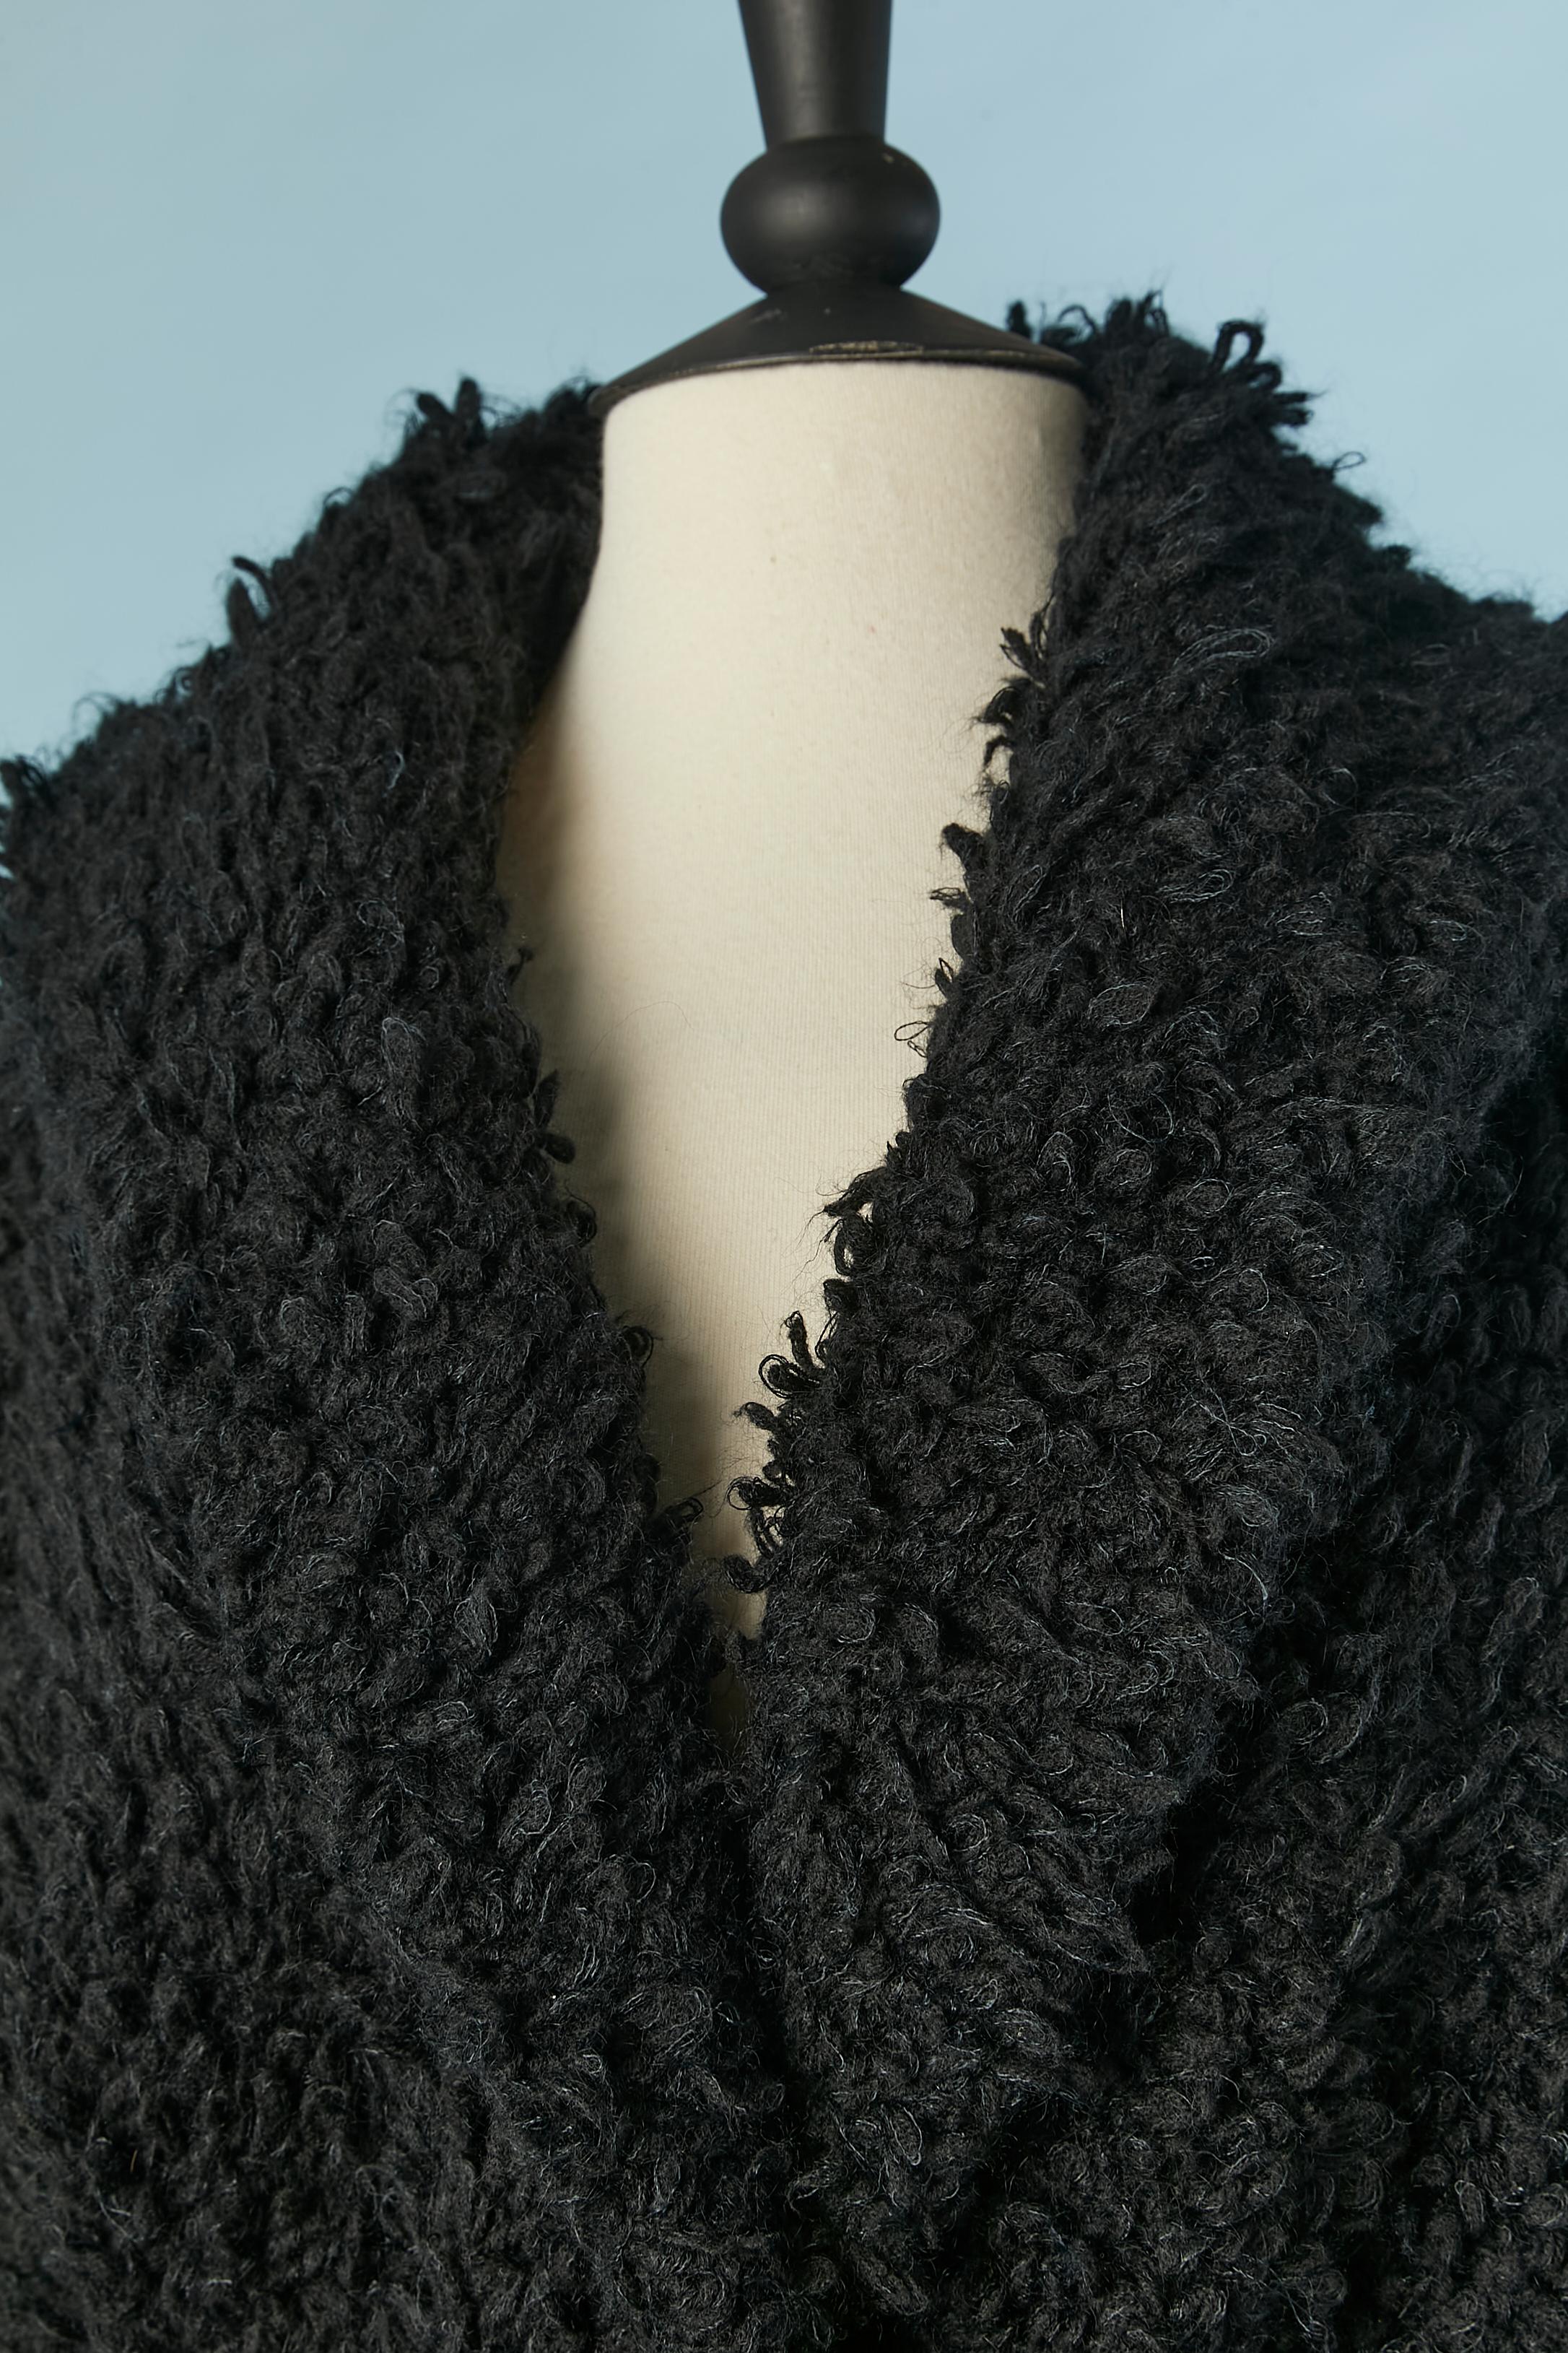 Black knit bouclette coat with knit belt . Knit composition: 60% wool, 20% mohair, 10% angora, 10% polyamide. 
SIZE 40 